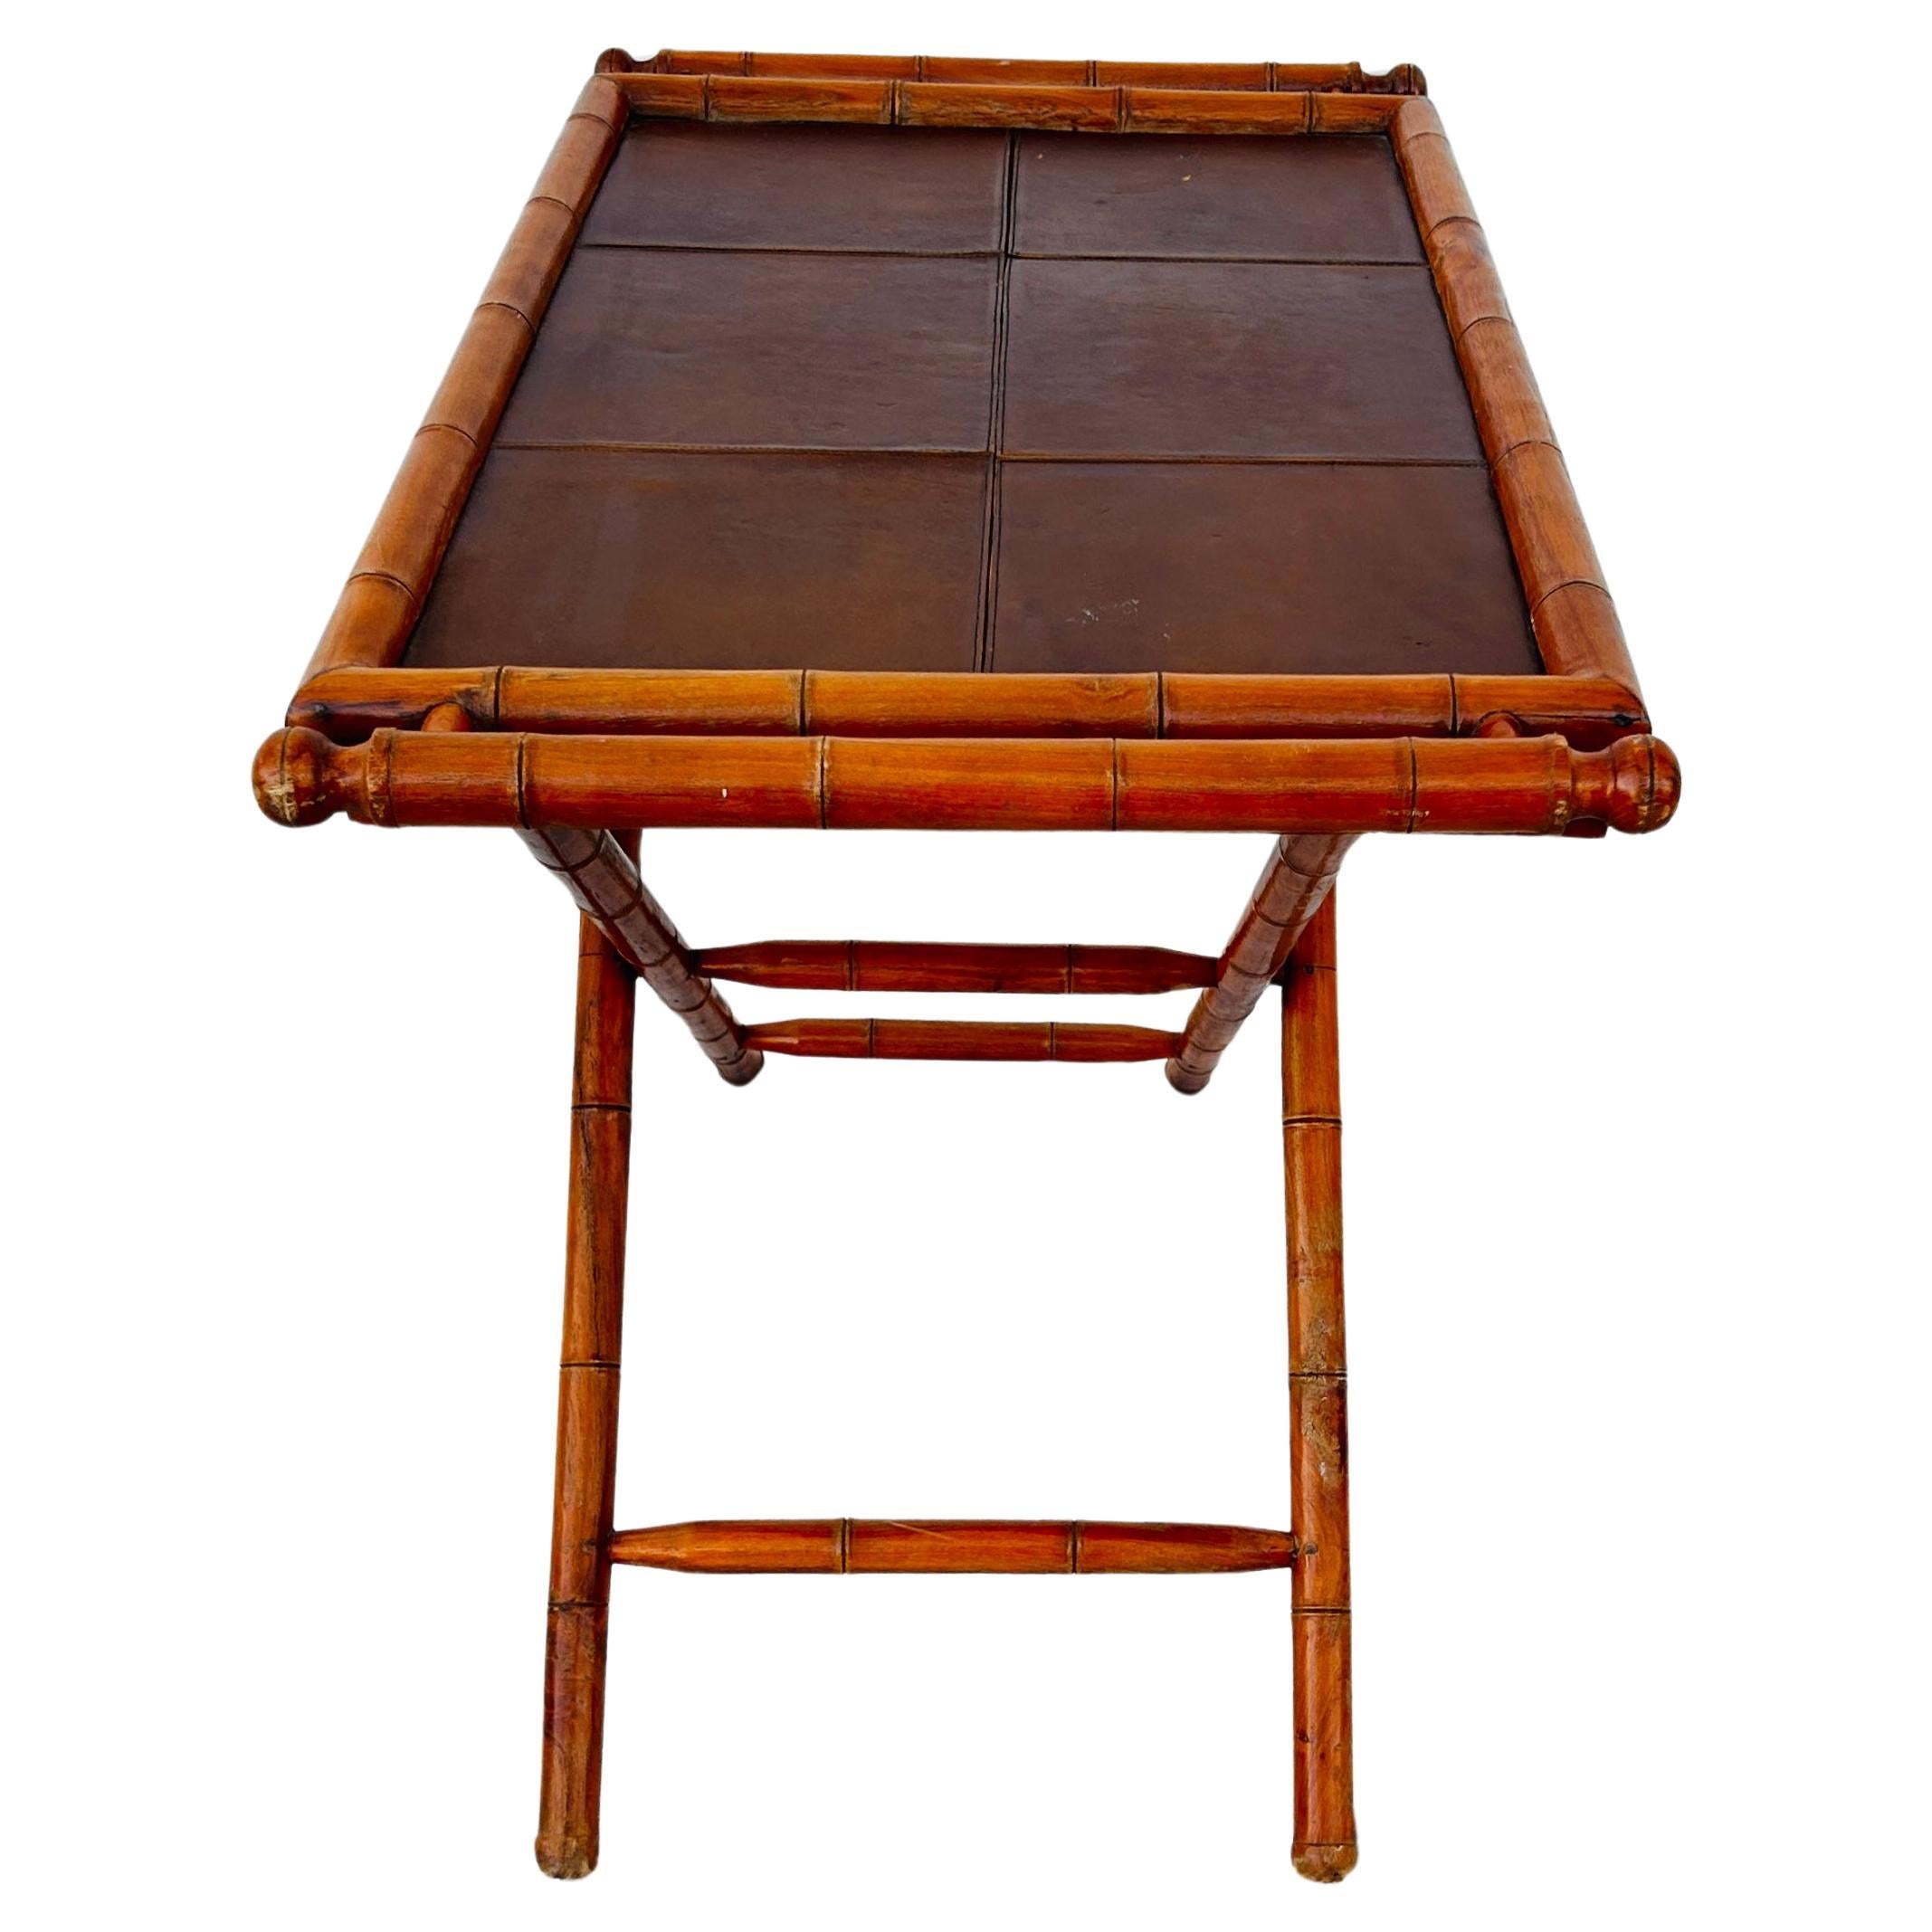 20th Century Mid-Century Faux Bamboo Folding Tray Table with Leather Insert For Sale